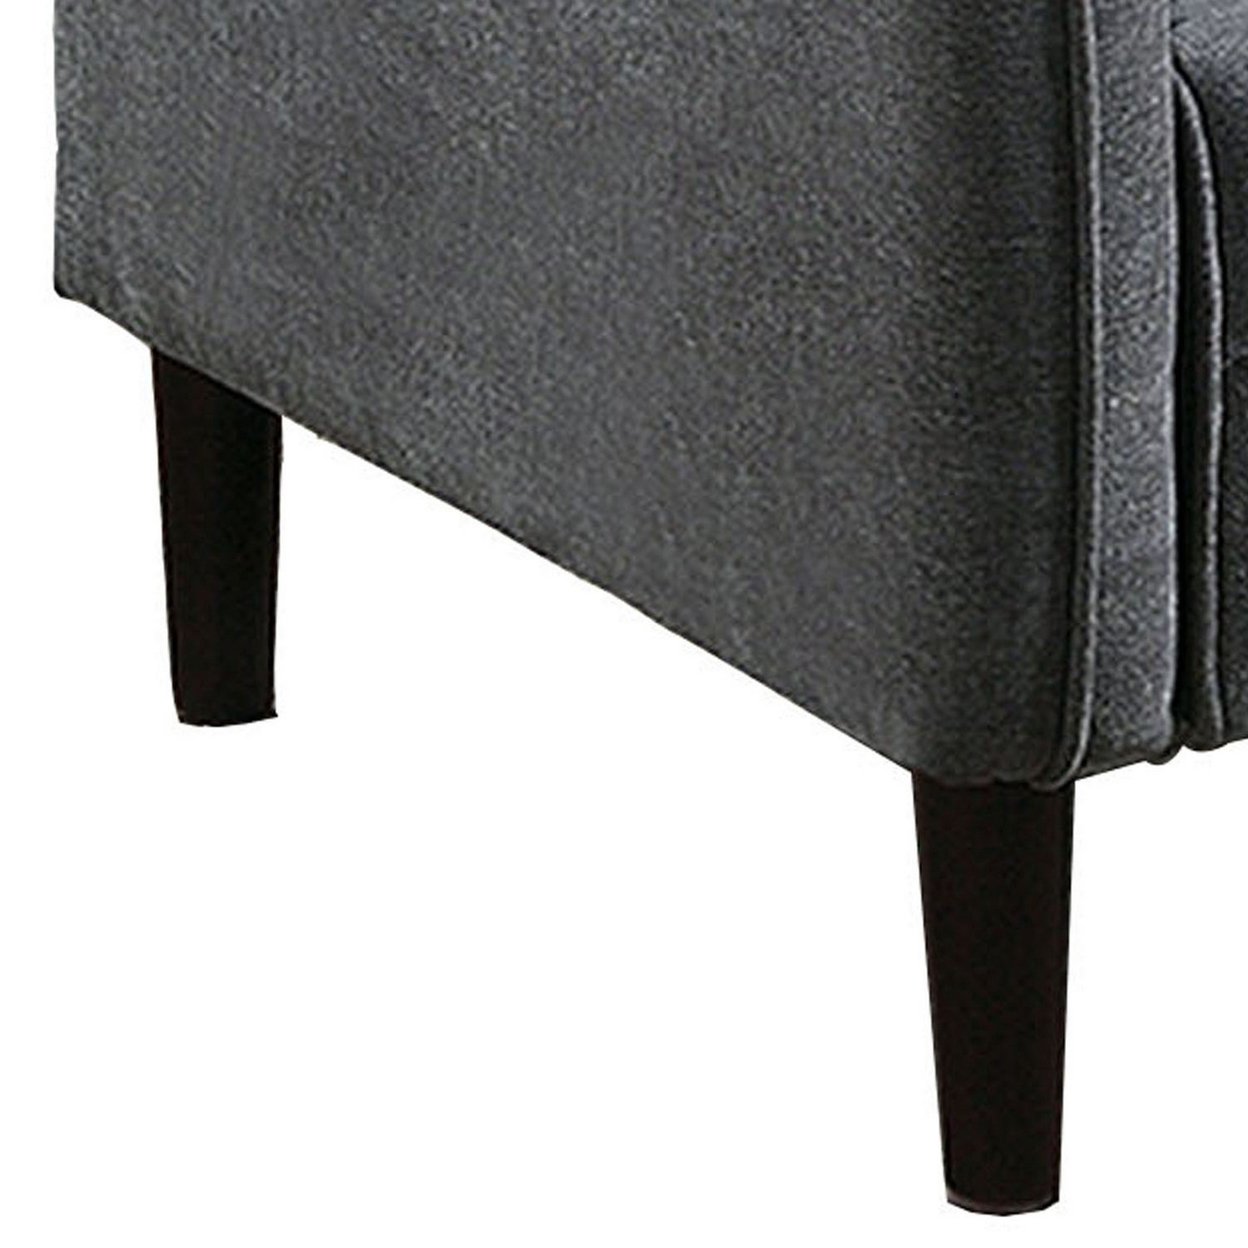 Hak 33 Inch Accent Chair, Rounded Arms, Biscuit Tufting, Wood Legs, Gray - Saltoro Sherpi